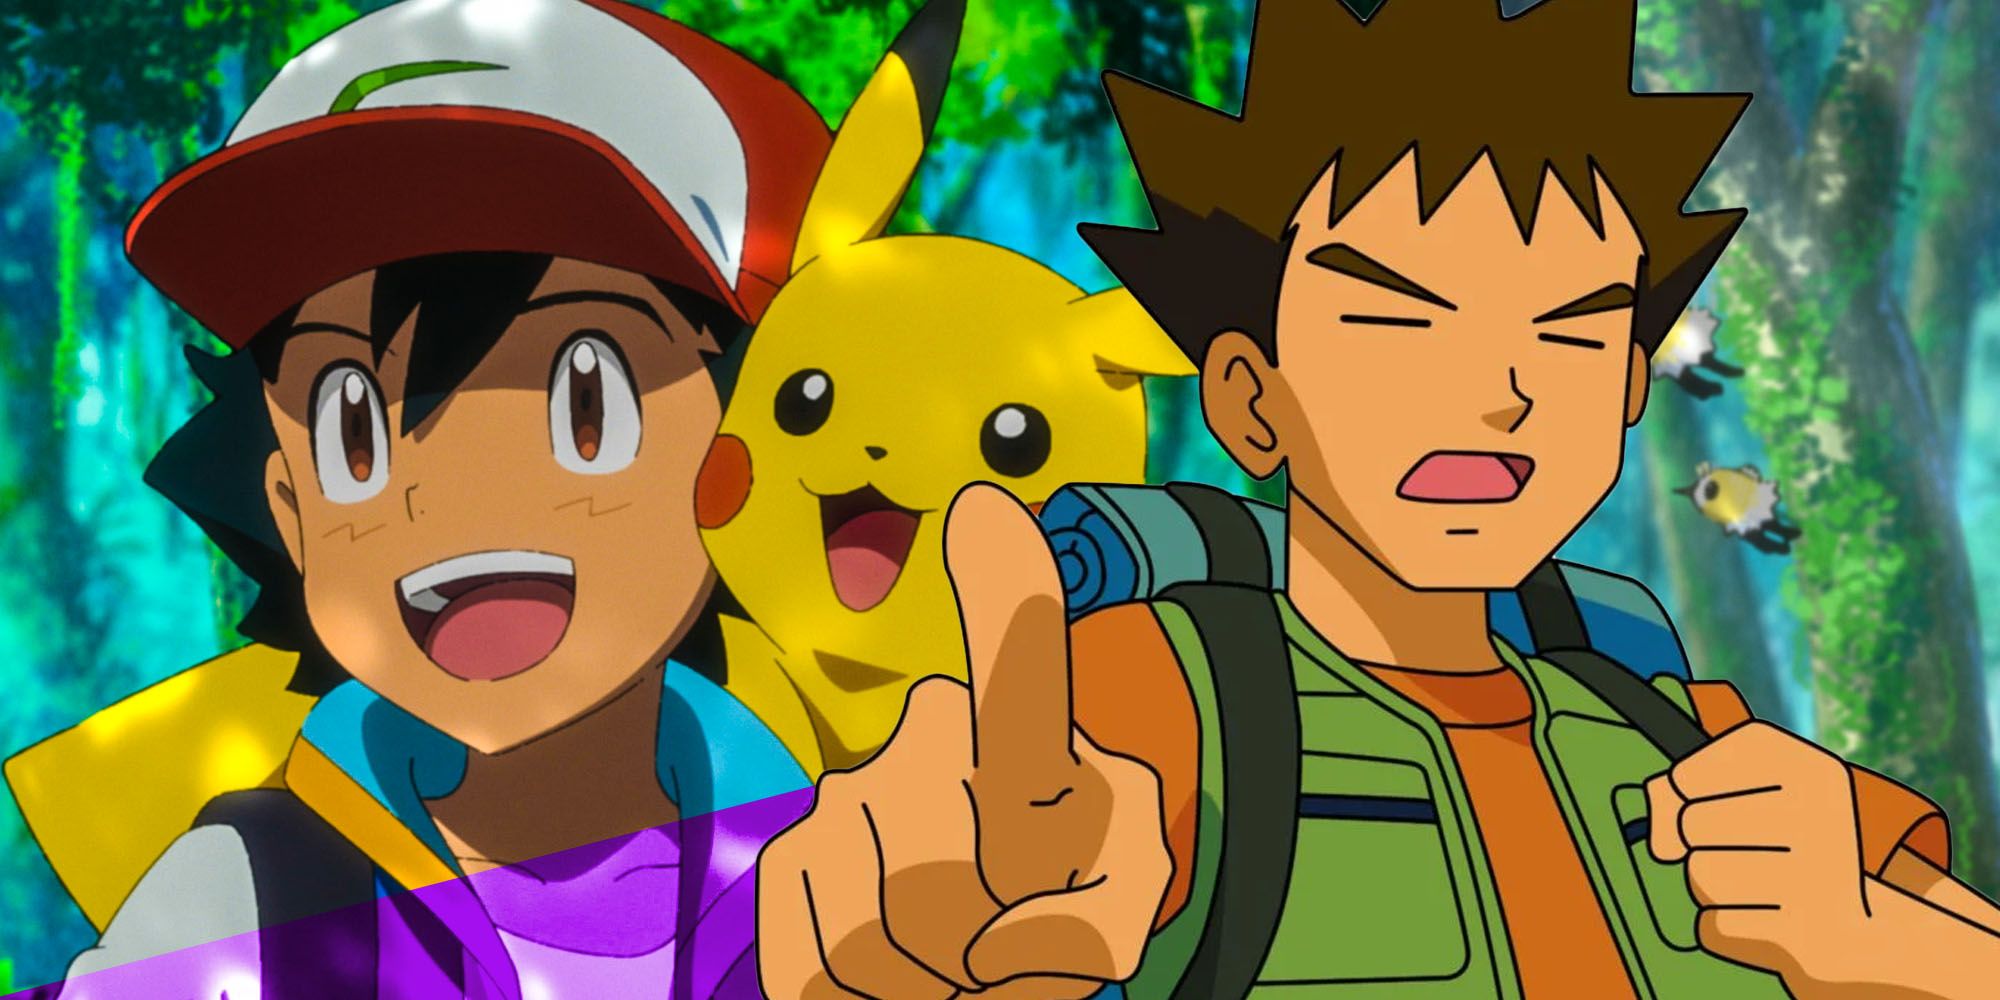 Brock and Ash with Pikachu in Pokemon